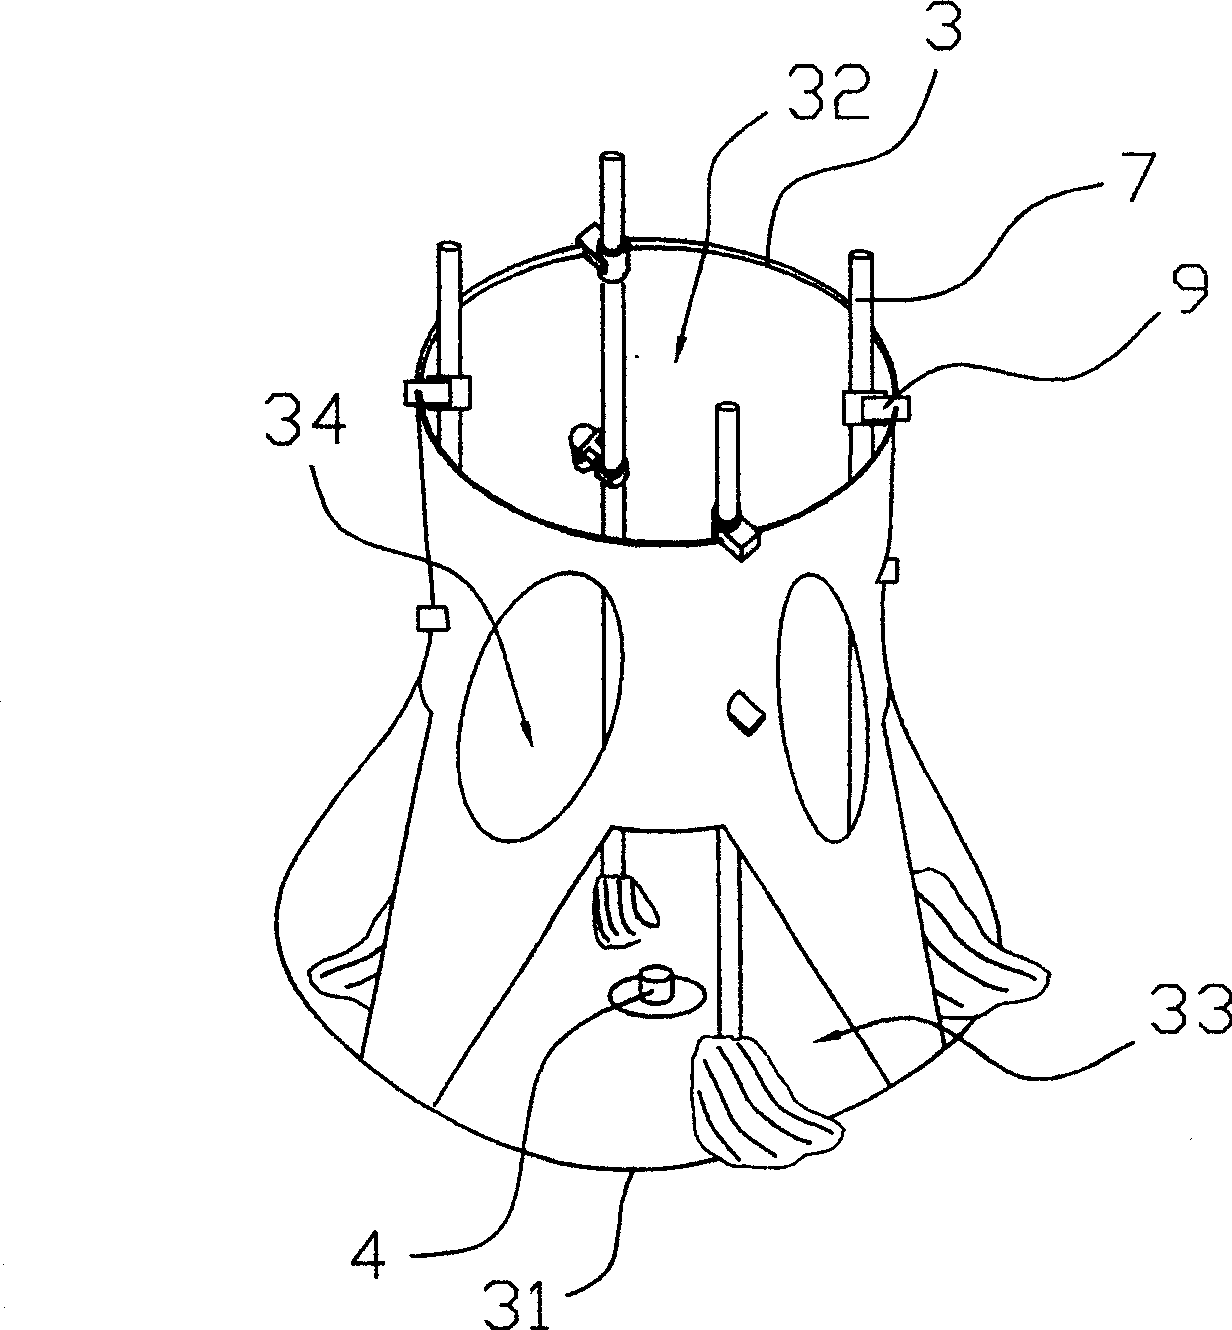 Apparatus for washing and squeezing mop